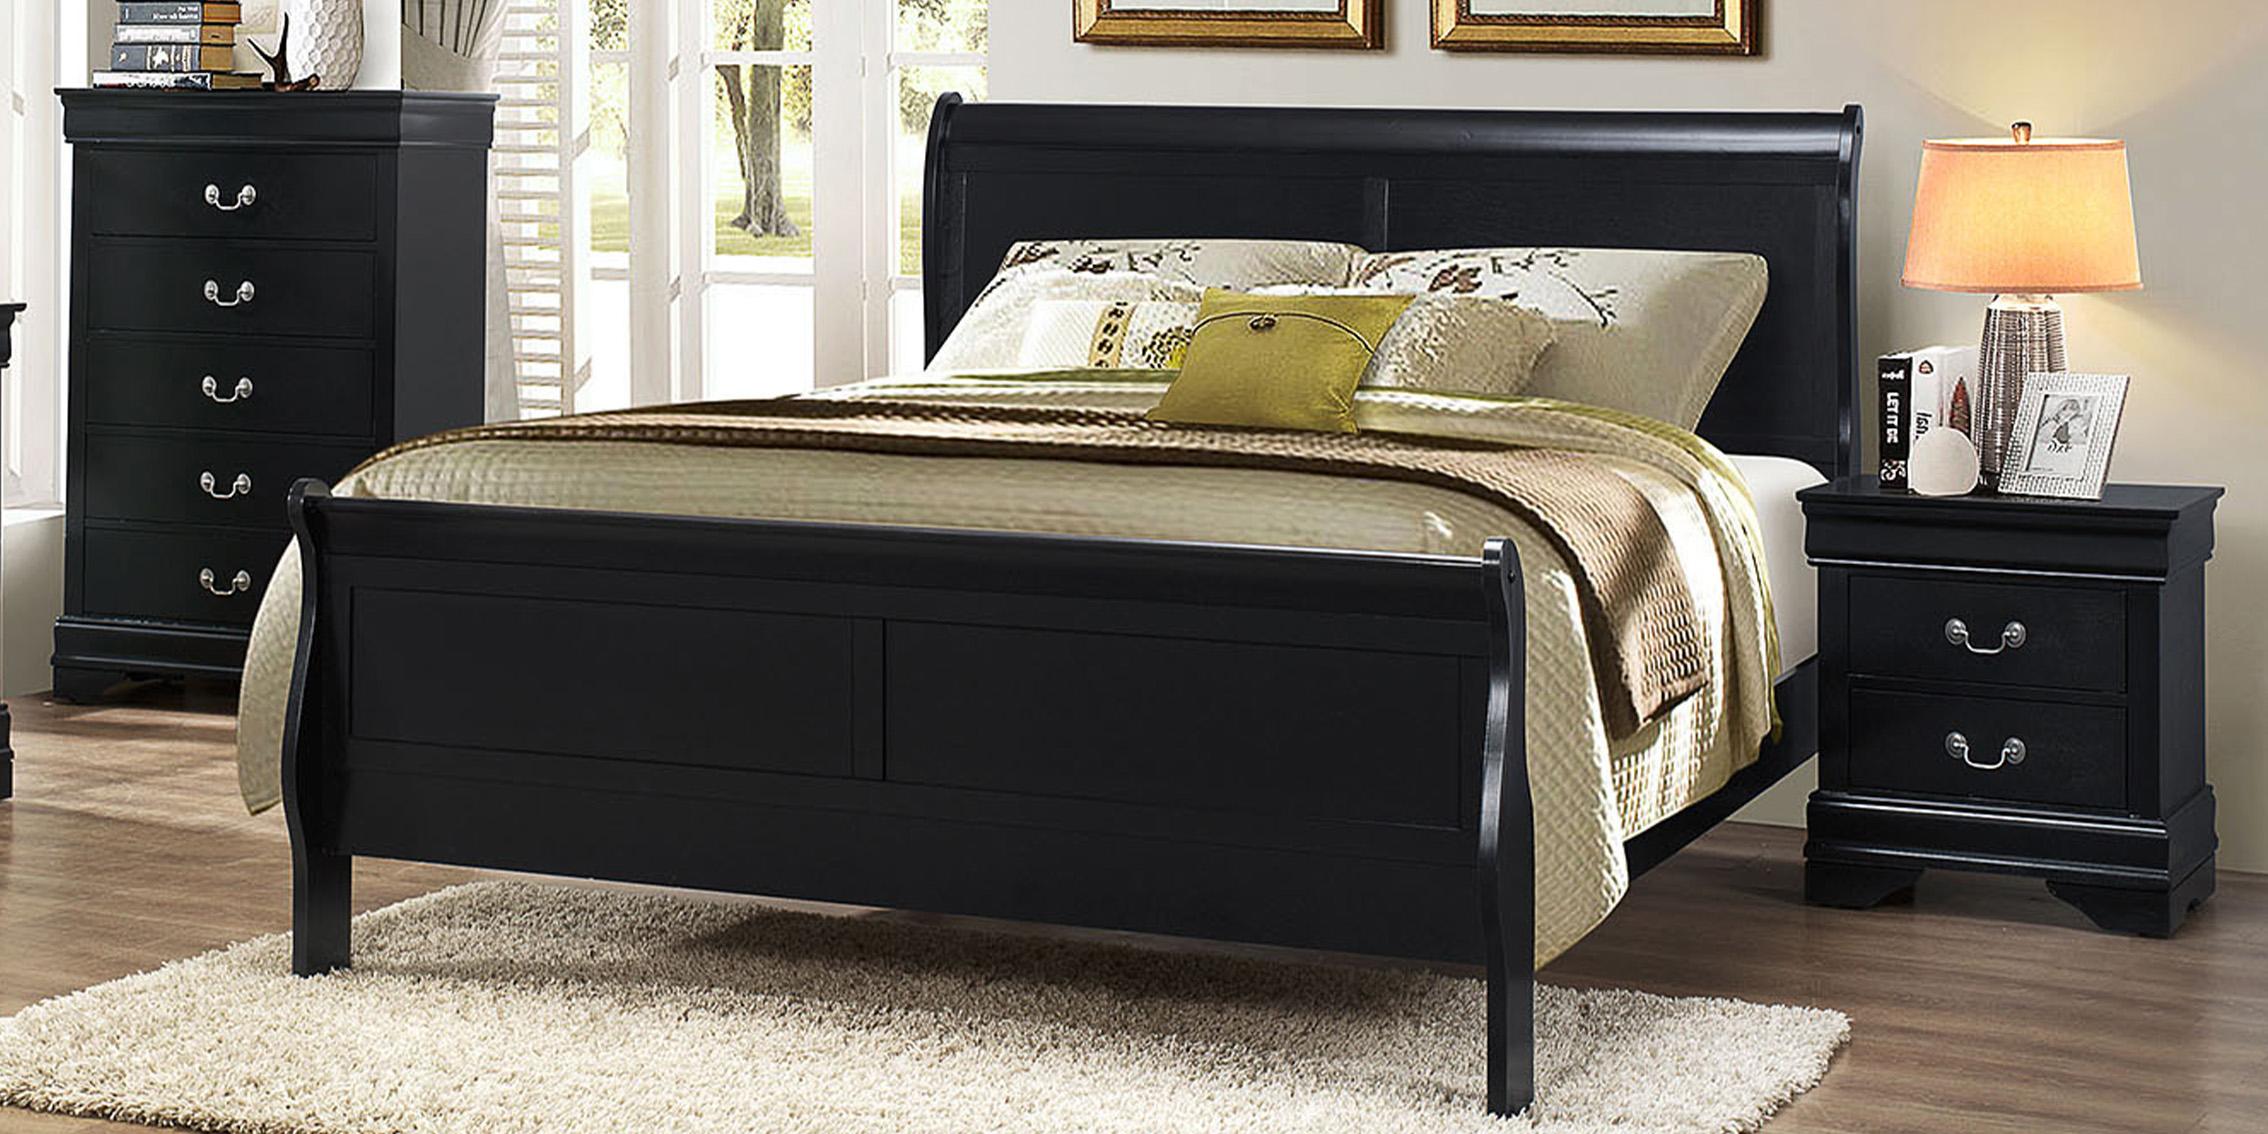 Contemporary, Modern Panel Bed LOUIS PHILLIPE GHF-808857552006 in Black 